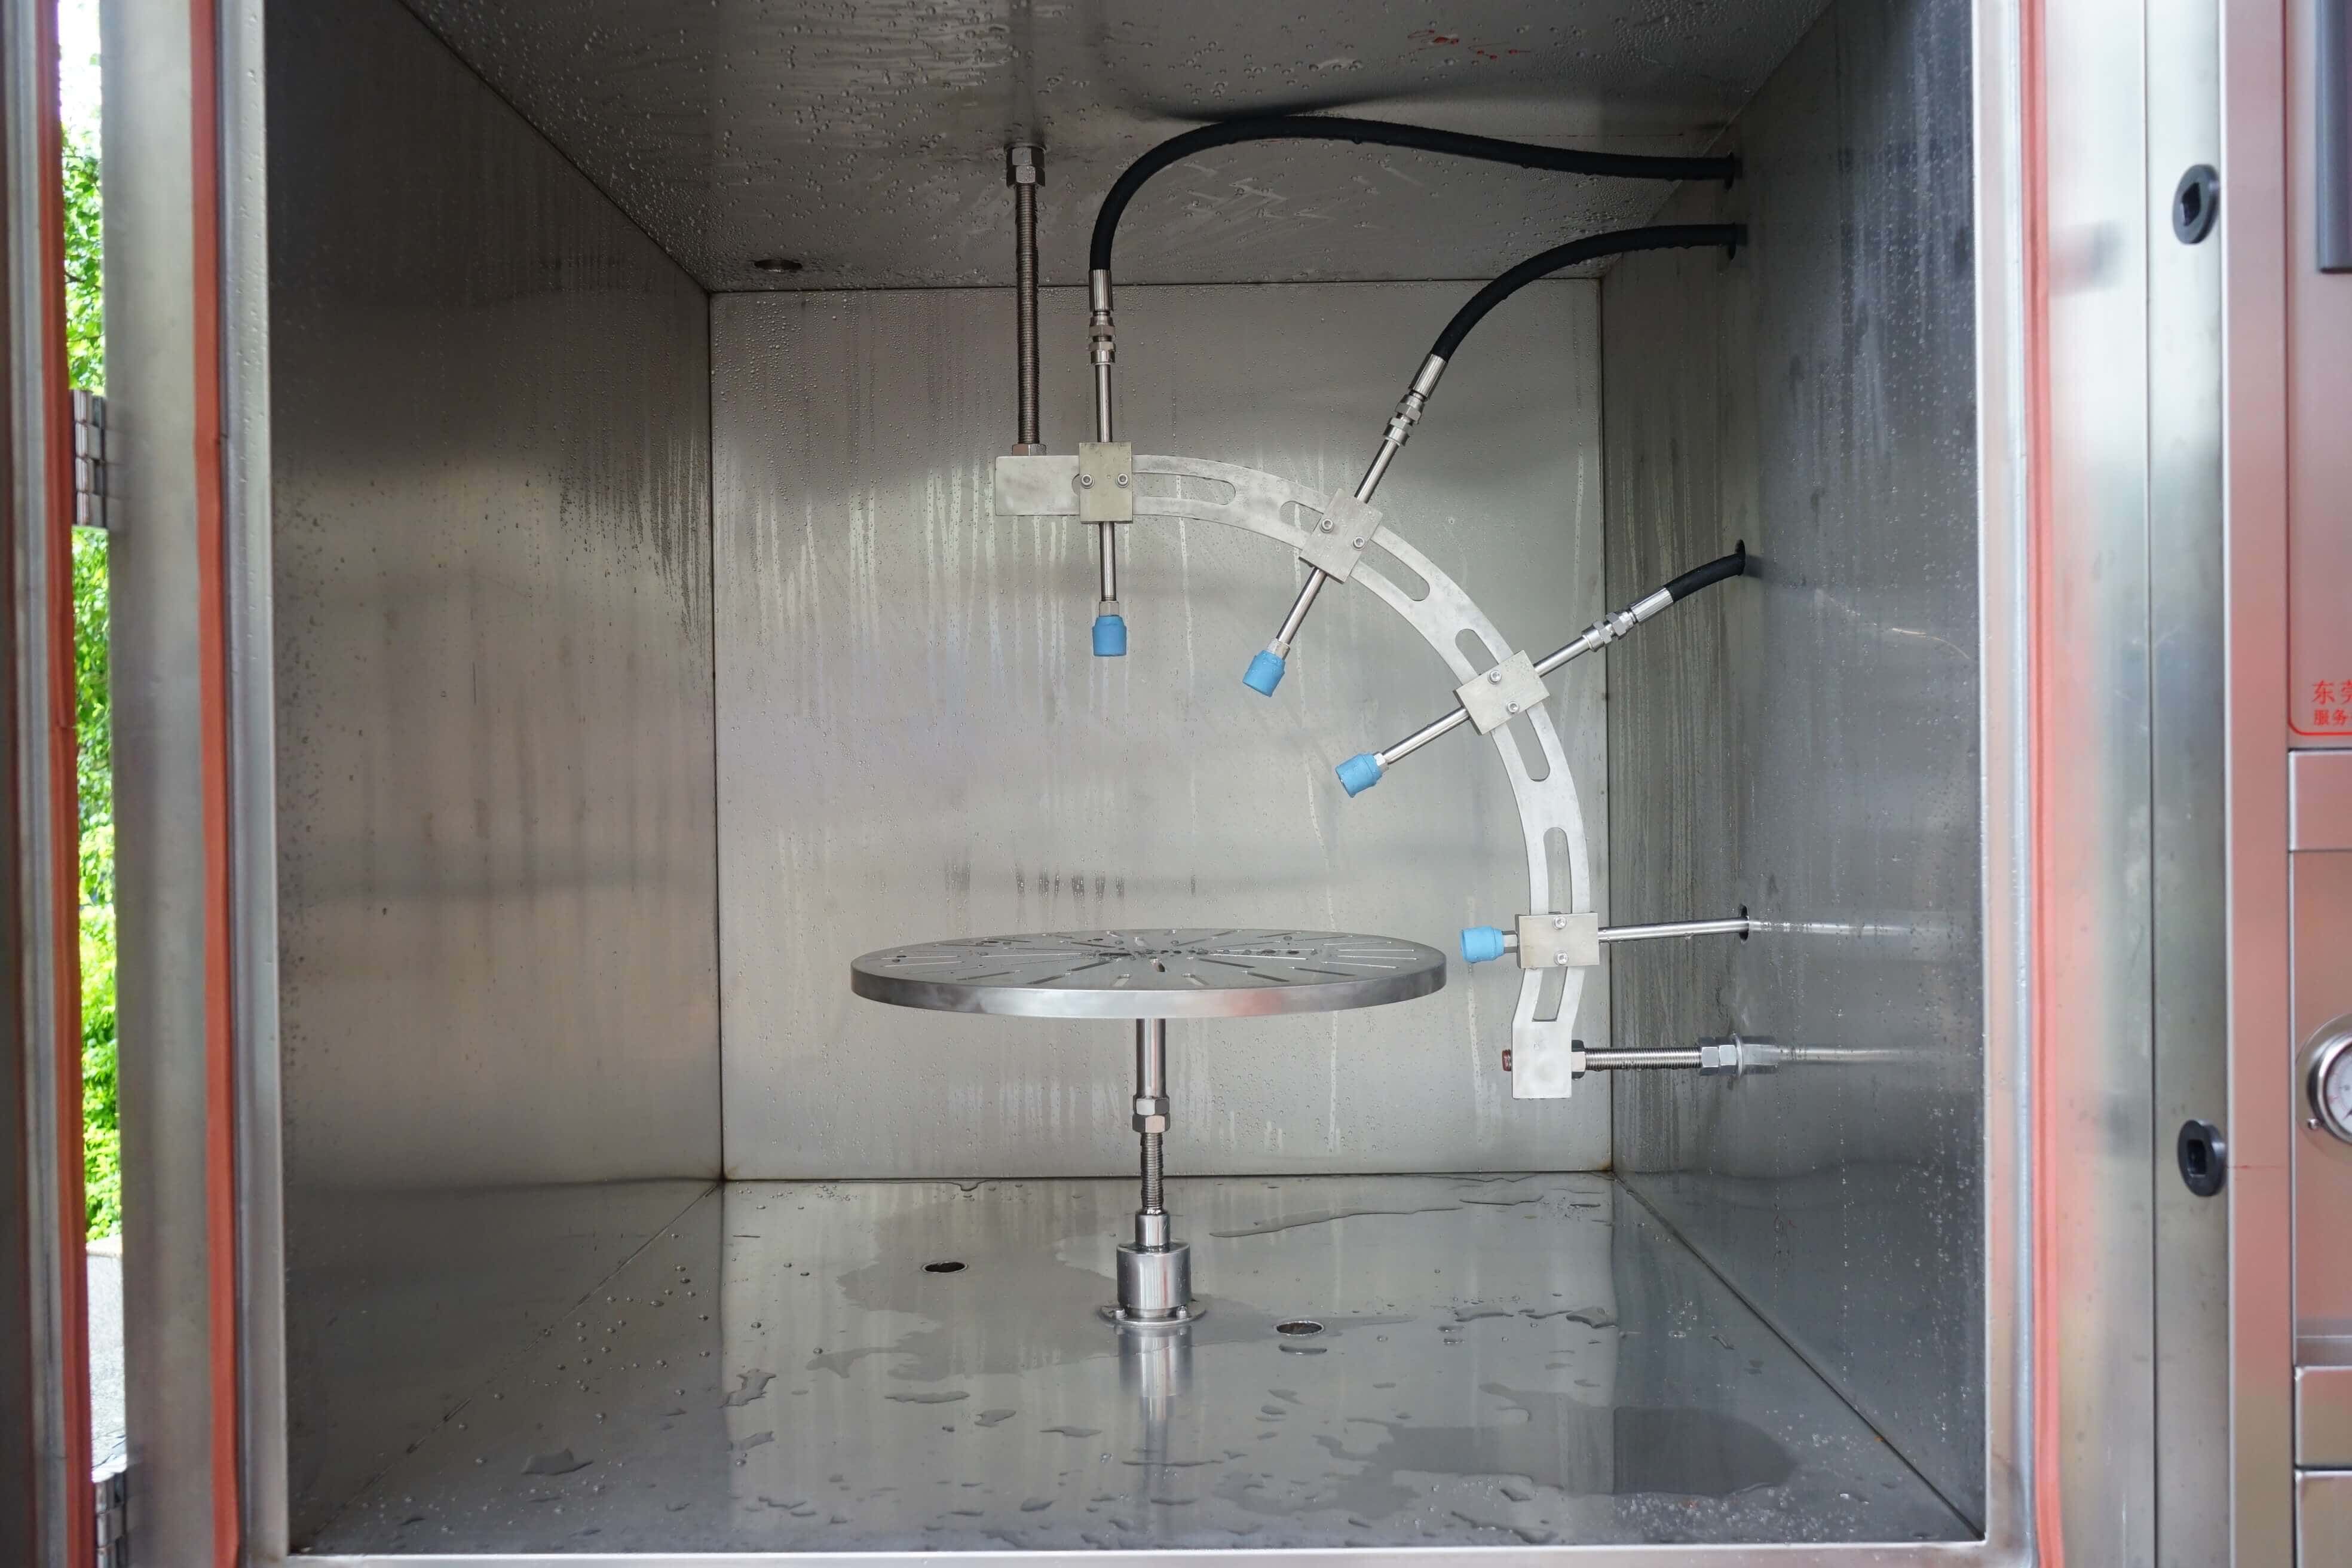 IPX9K High Temperature & Pressure Water Test Chamber